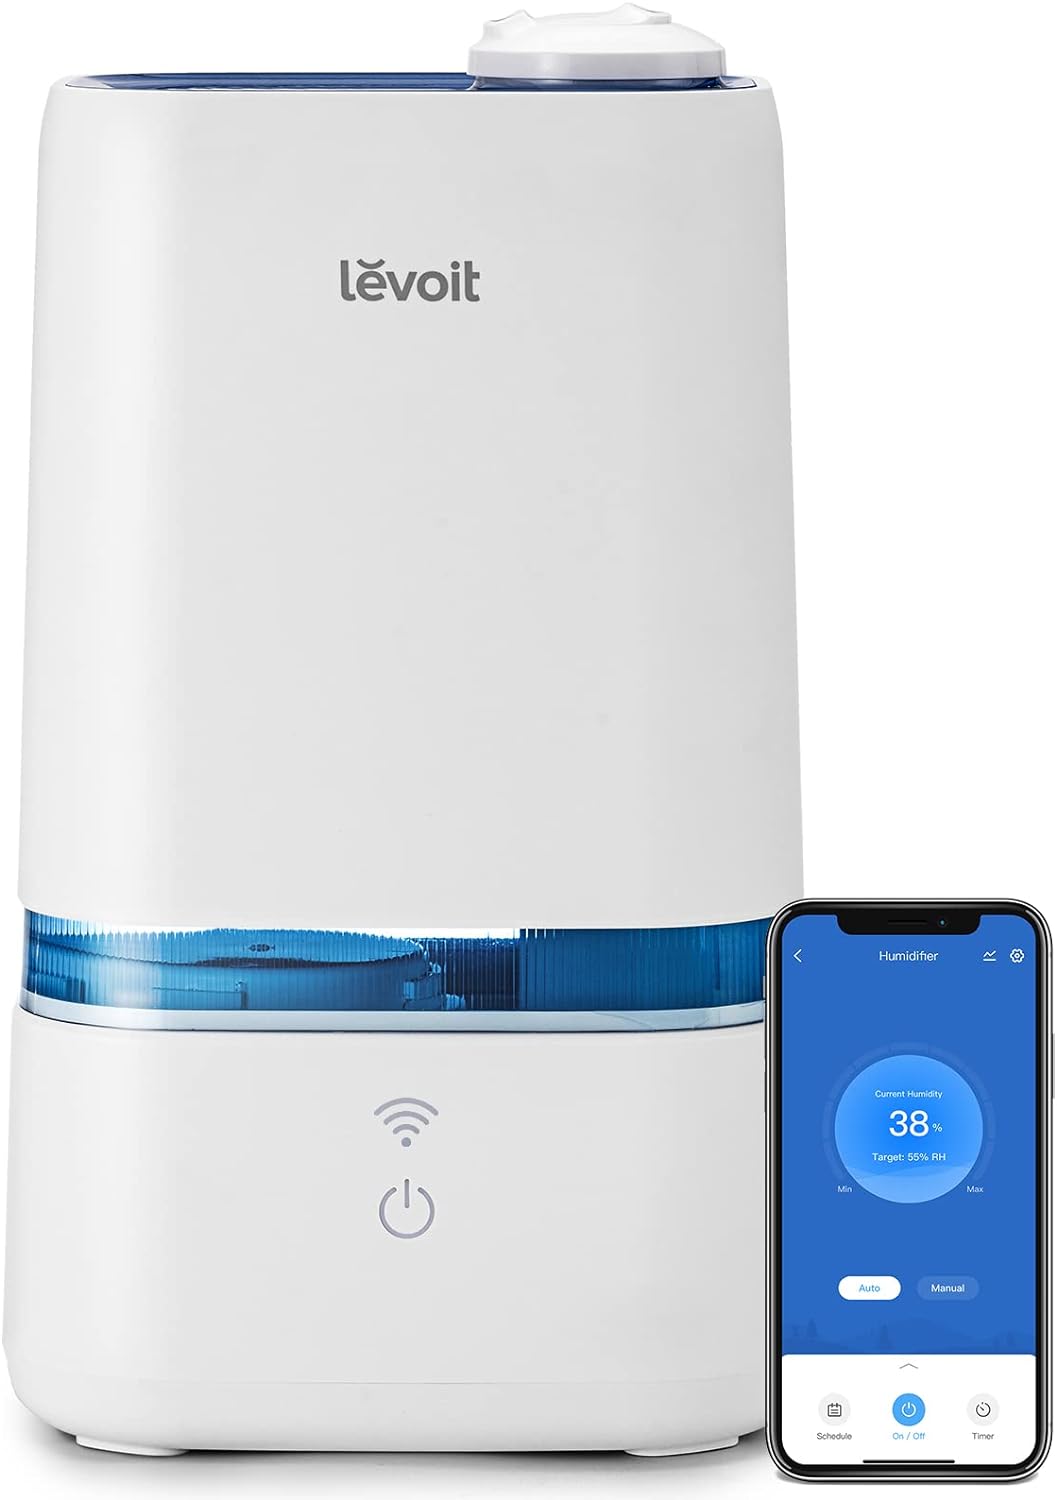 LEVOIT 4L Smart Cool Mist Humidifier for Home Bedroom with Essential Oils, Customize Humidity for Baby & Plants, APP & Voice Control, Schedule, Timer, Last up to 40Hrs, Whisper Quiet, Handle Design